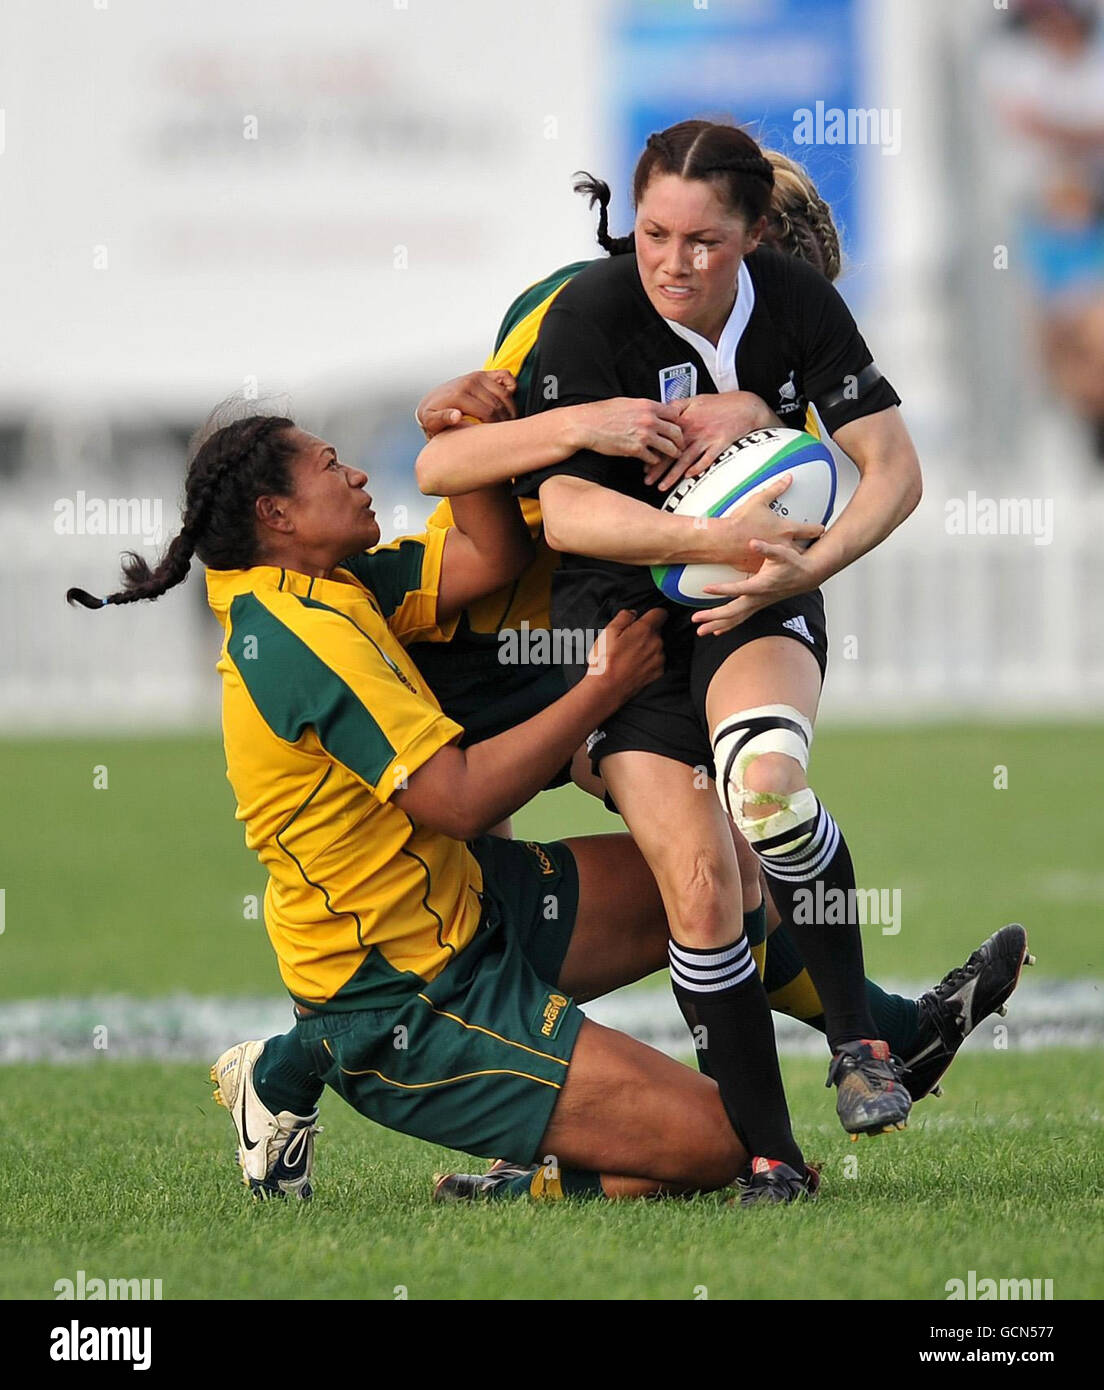 New Zealand's Victoria Grant is tackled by Australia's Se'el Sa'U (left) and Tobie McGann during the IRB Women's World Cup match at Surrey Sports Park, Guildford. Stock Photo